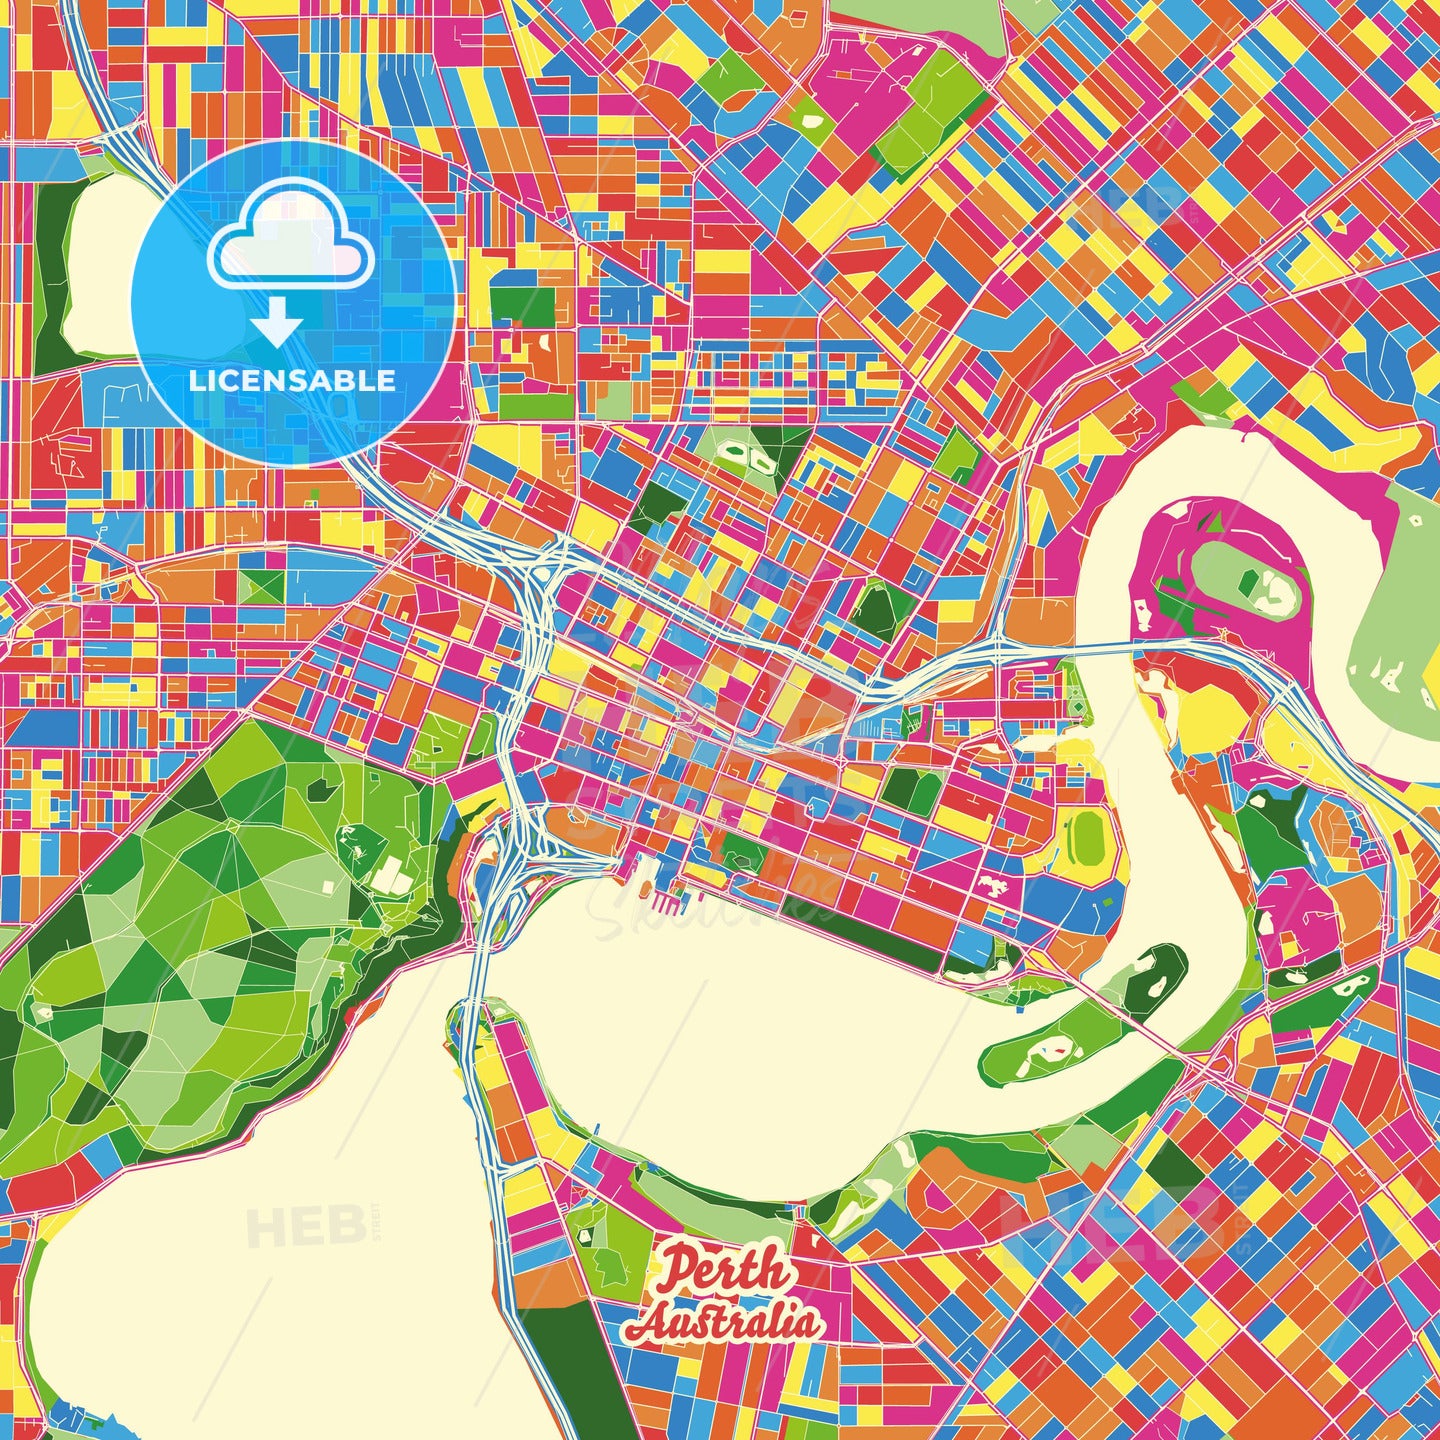 Perth, Australia Crazy Colorful Street Map Poster Template - HEBSTREITS Sketches